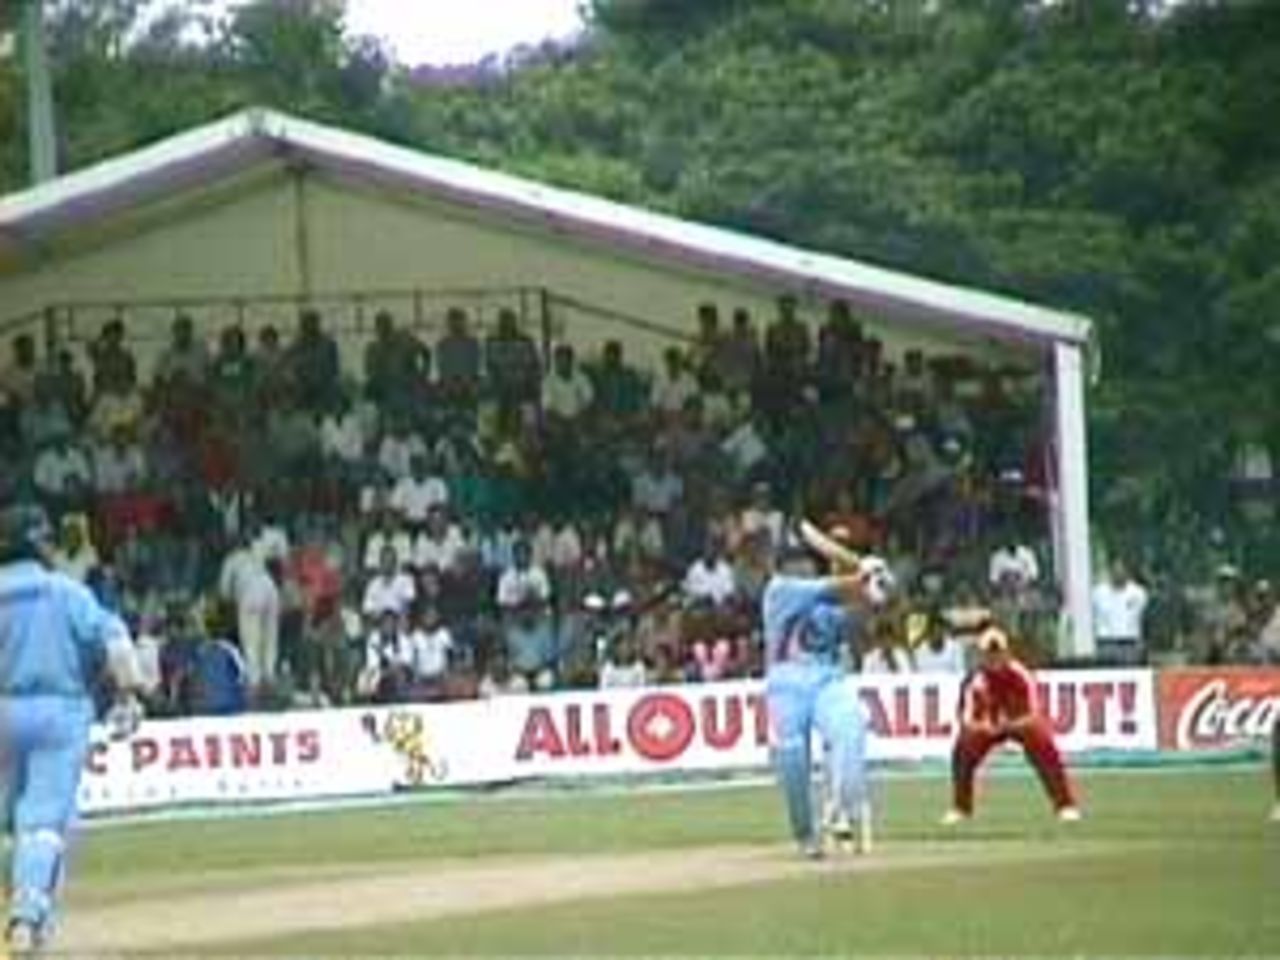 Tendulkar bludgeons a ball over mid-wicket en route to his 85, India v Zimbabwe (2nd ODI), Coca-Cola Singapore Challenge, 1999-2000, Kallang Ground, Singapore, 4 Sep 1999